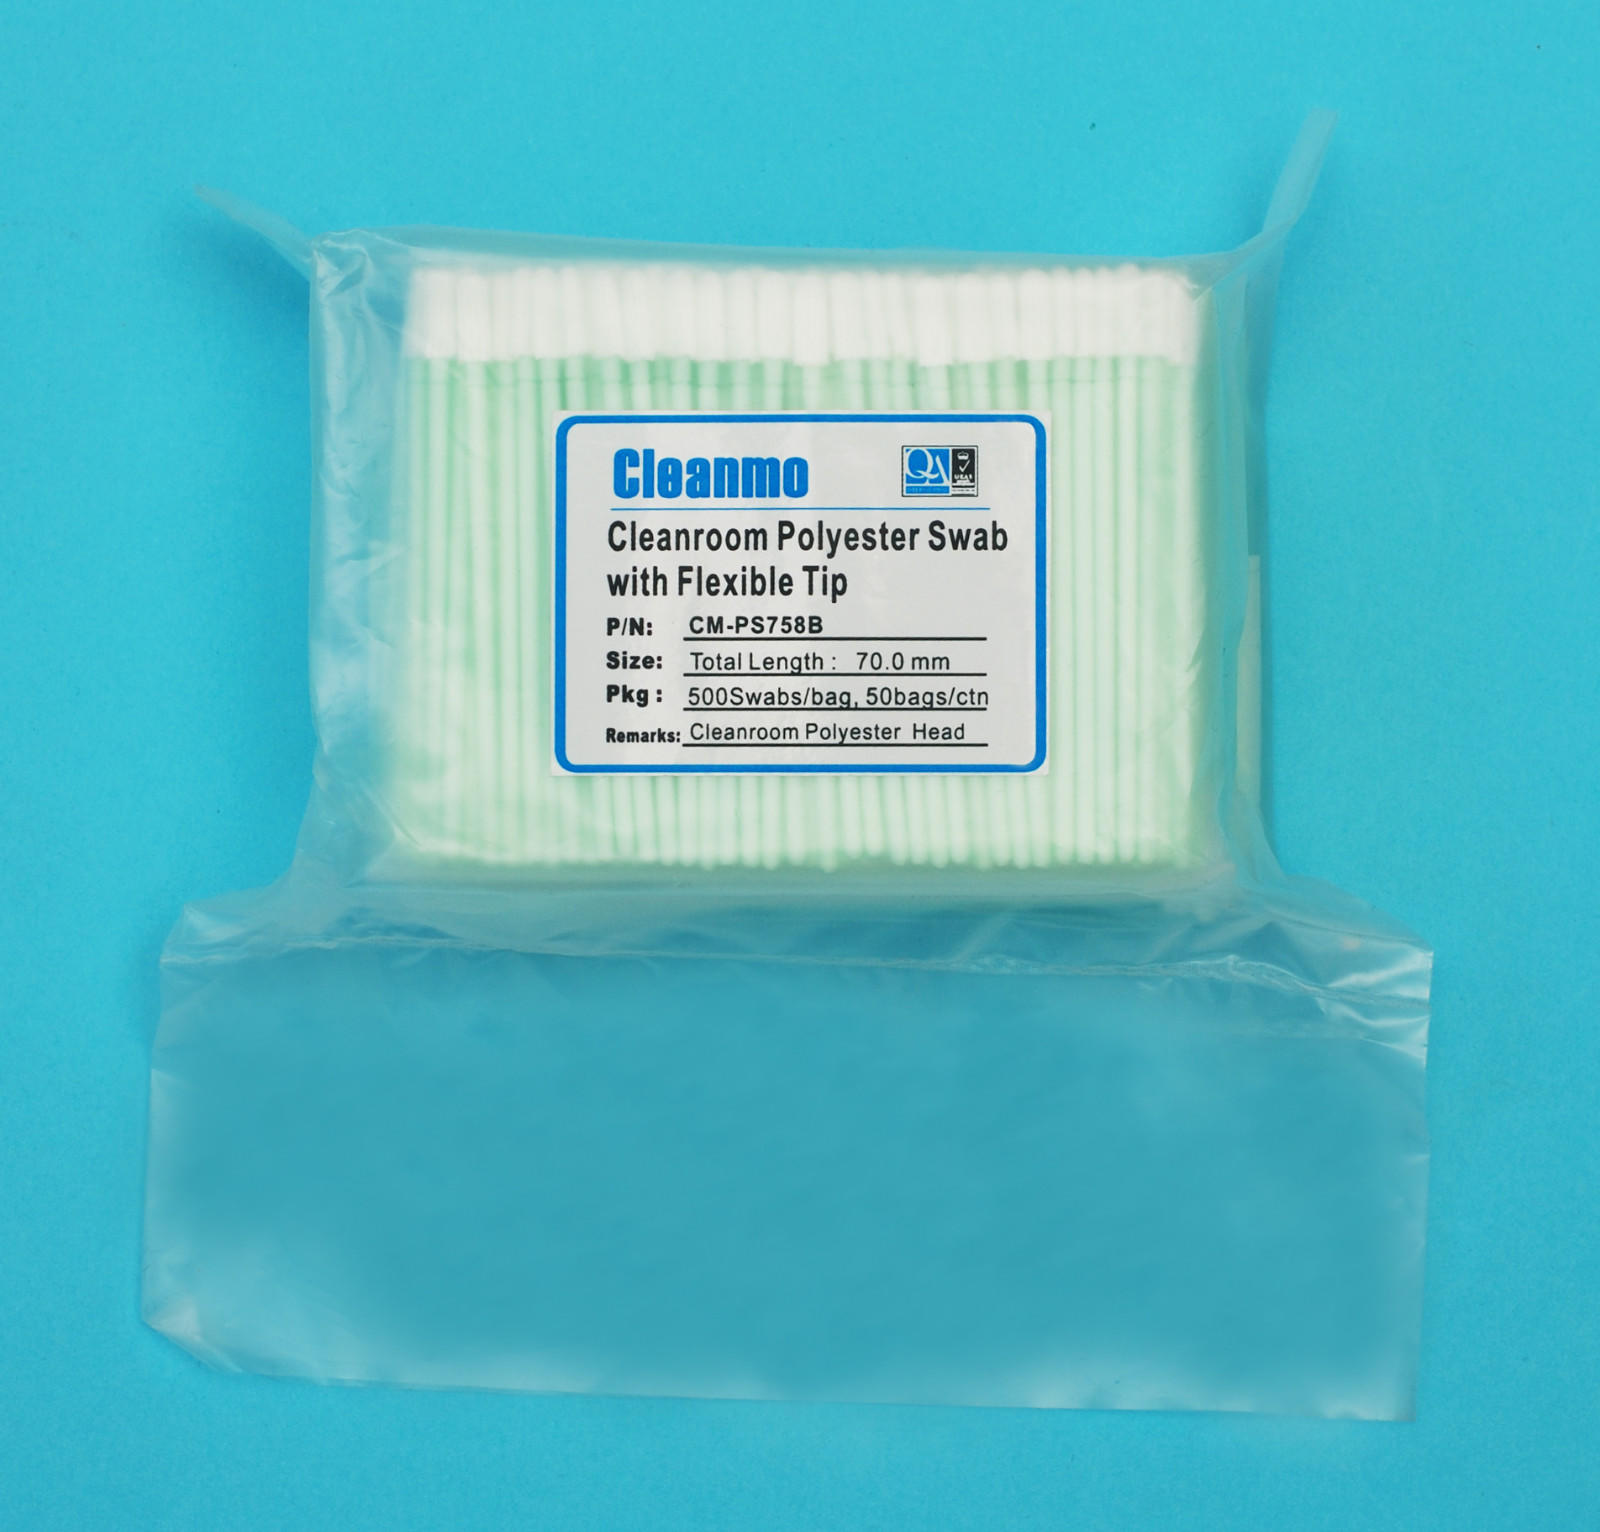 Cleanmo safe material polyester cleanroom swabs manufacturer for optical sensors